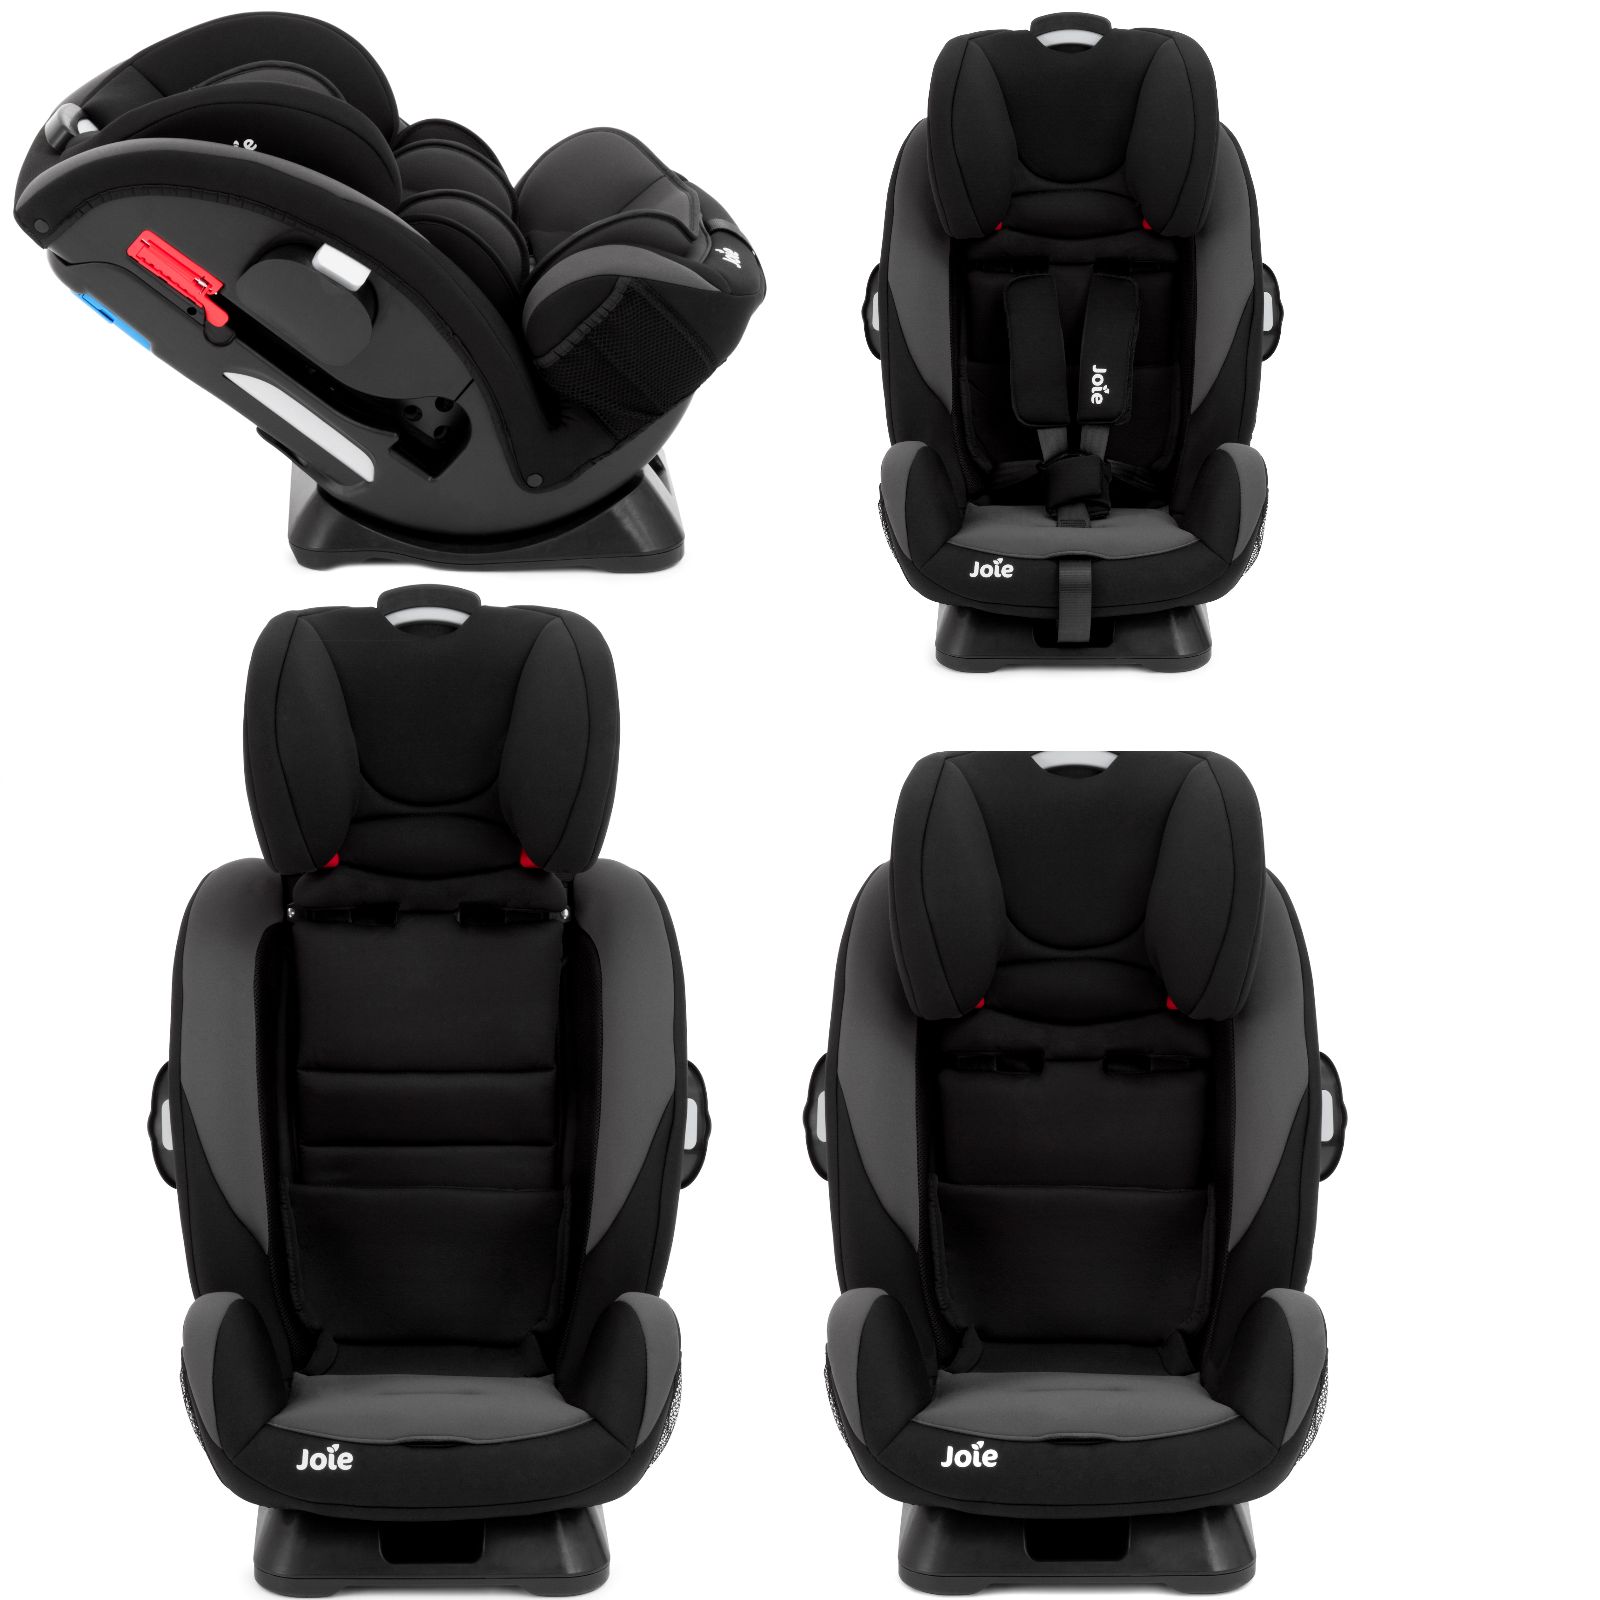 JOIE EVERY STAGE TWO TONE BLACK GROUP 0+/1/2/3 CAR SEAT FROM BIRTH BABY